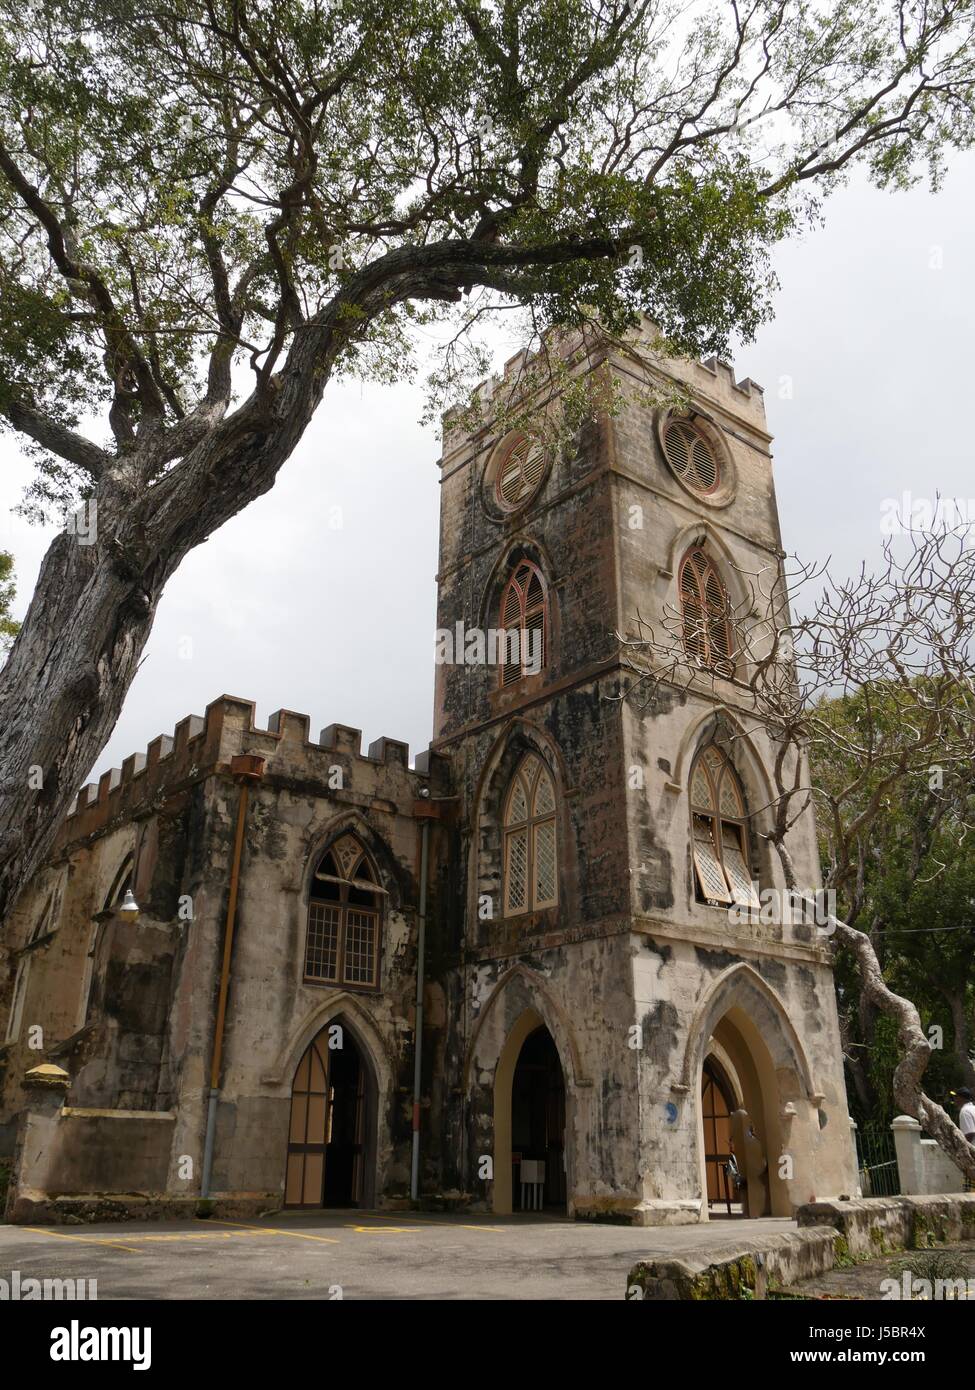 St John’s Parish Church Barbados The Oldest Church In Barbados With An Old Cemetery At The